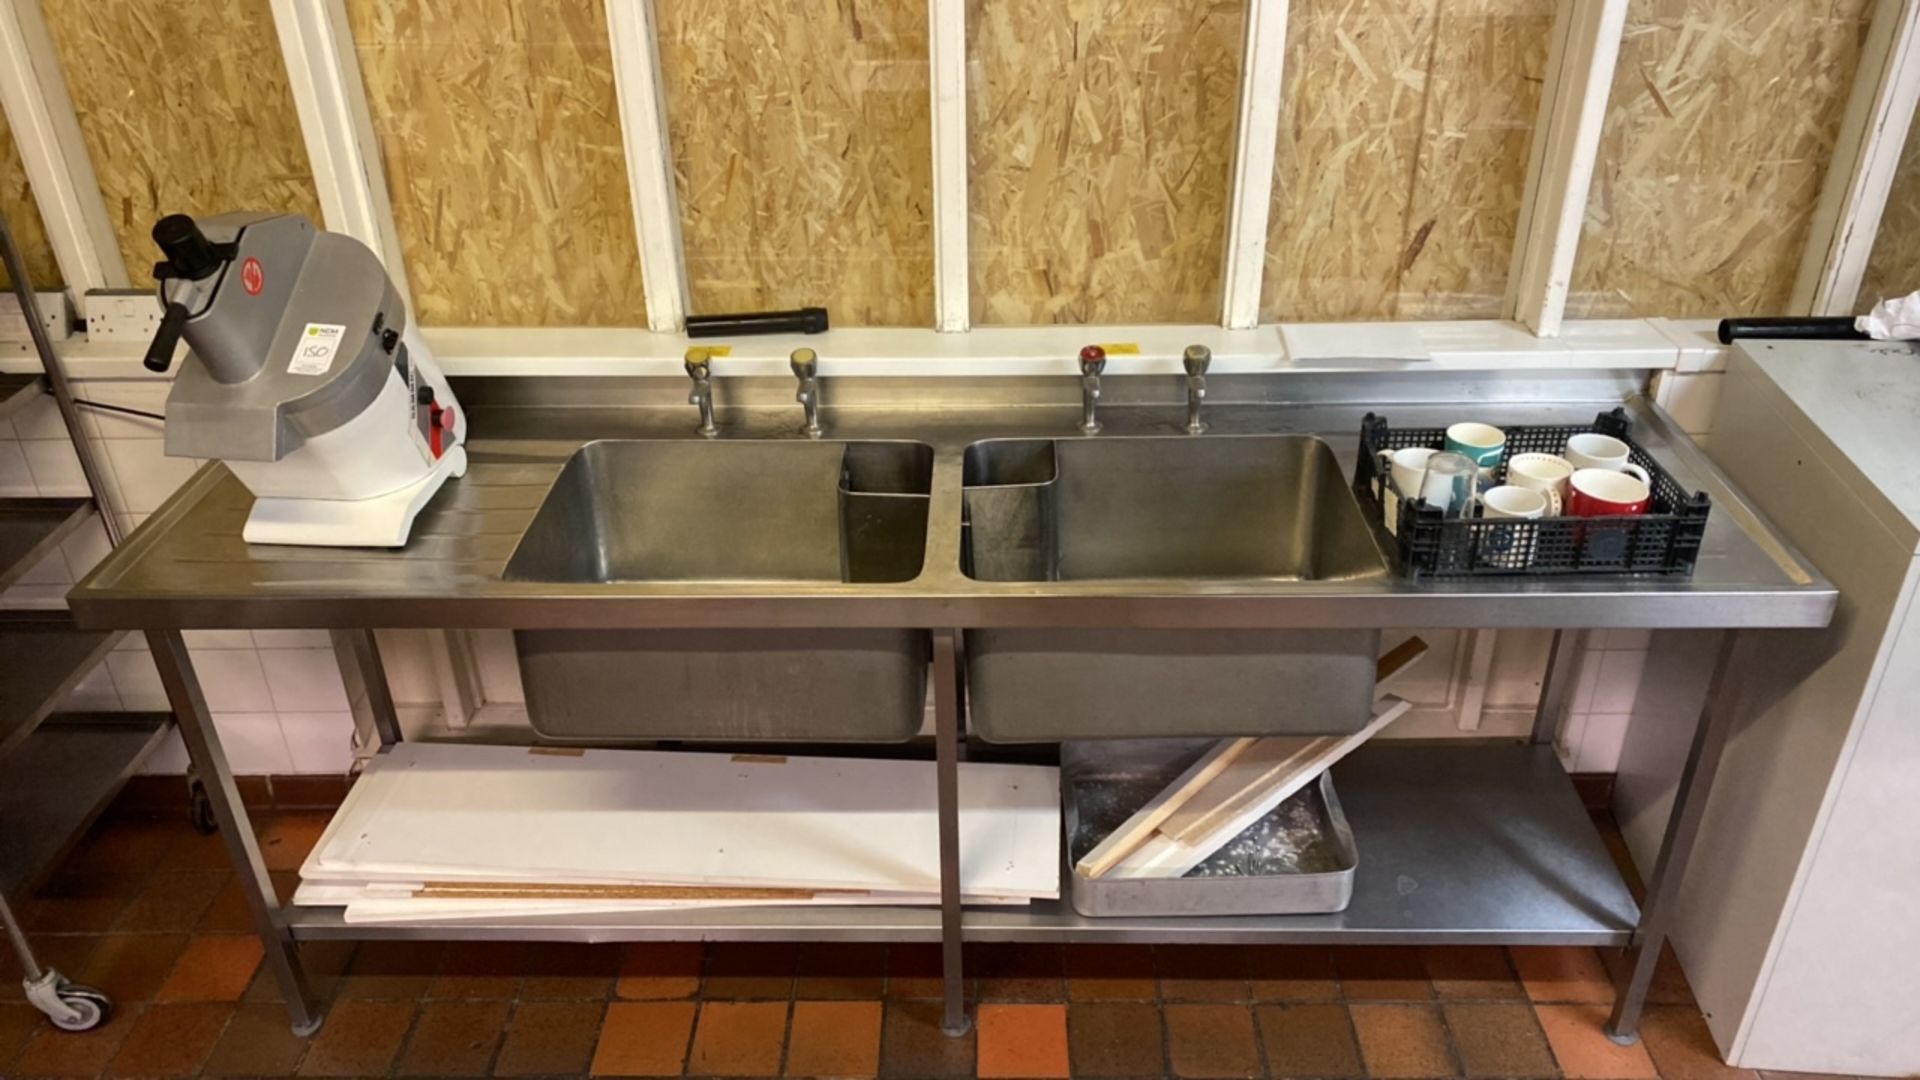 Stainless Steel Double Deep Based Sink - Image 2 of 4